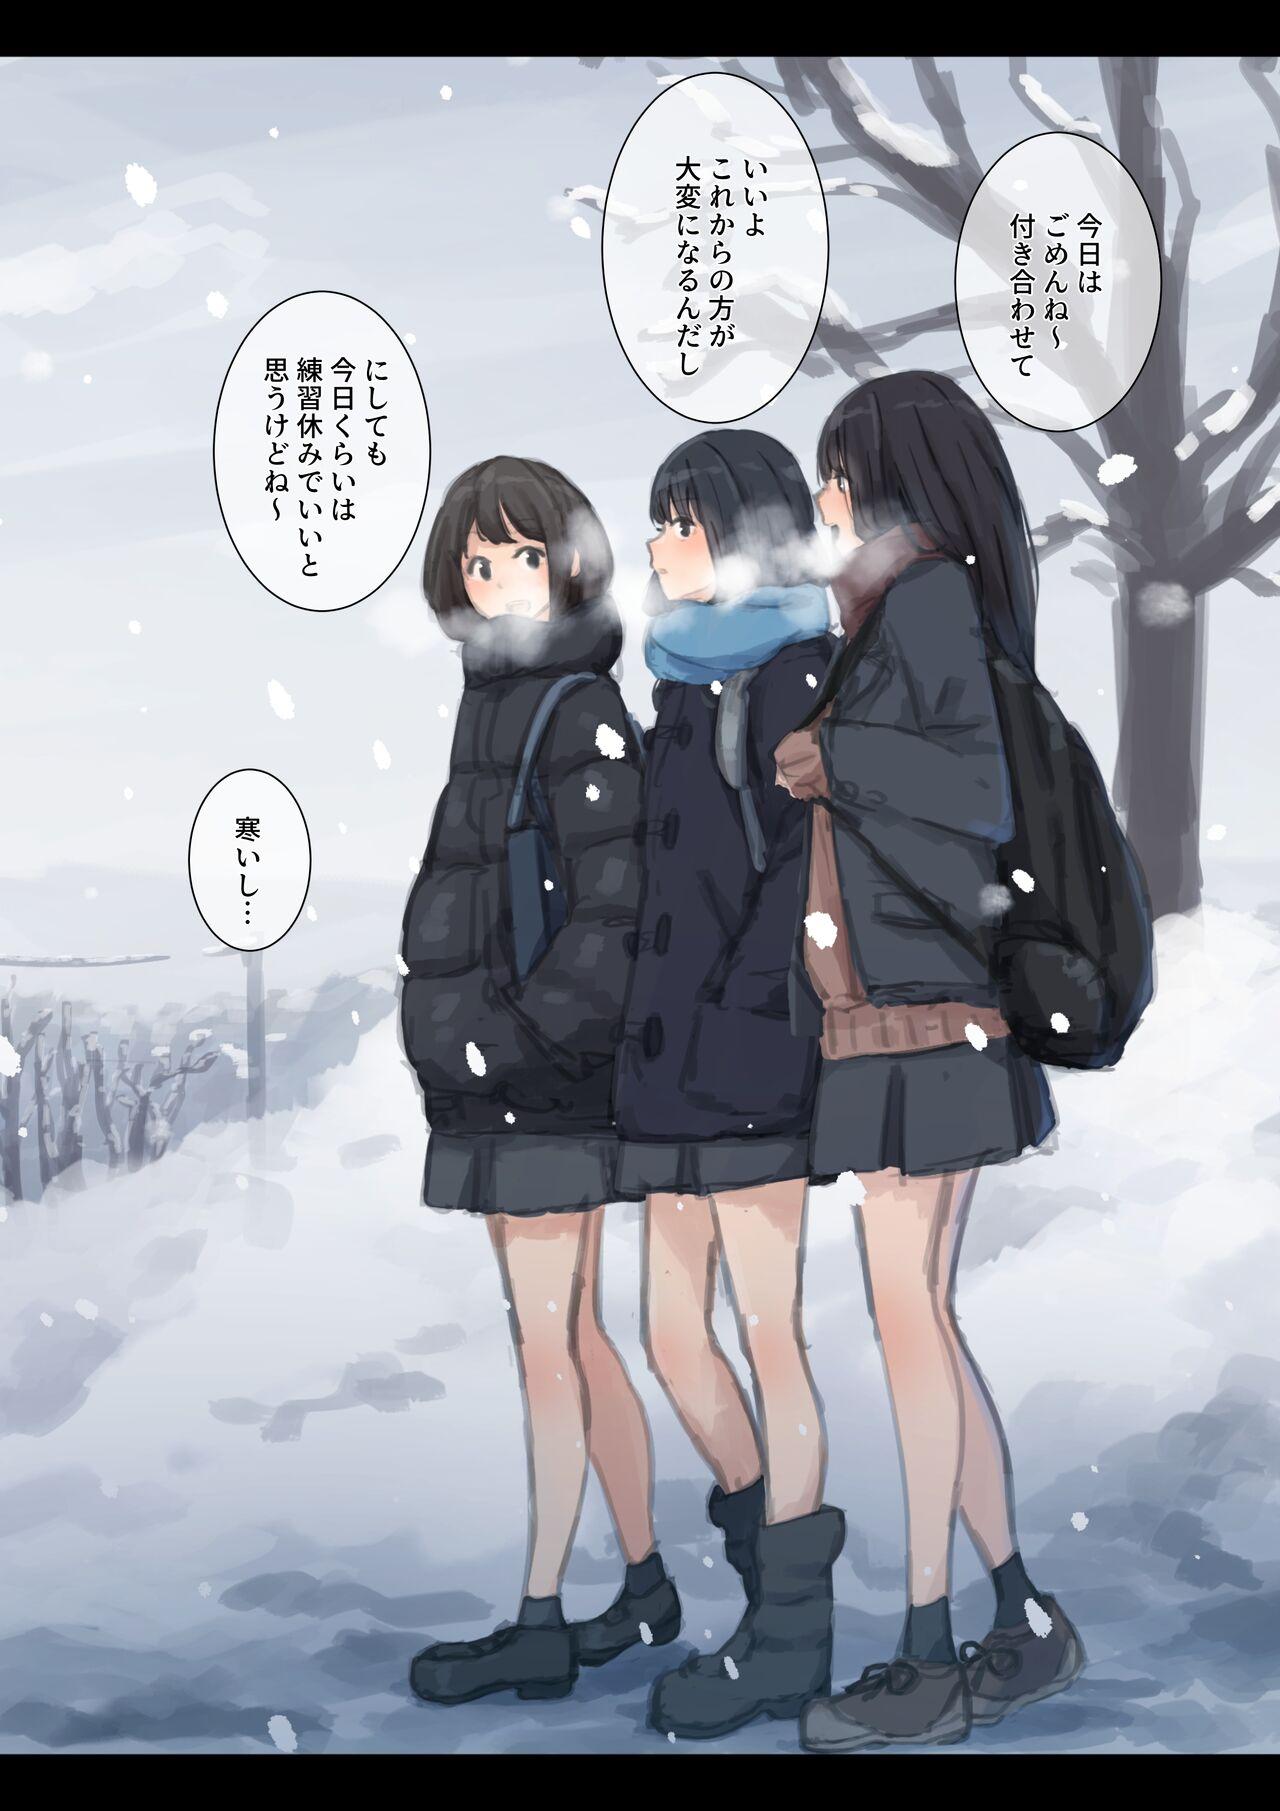 [Yukimuramaru] Public property Sex Slave Girl - Ex - Collection in the Snow - [Digital] [Ongoing] 6